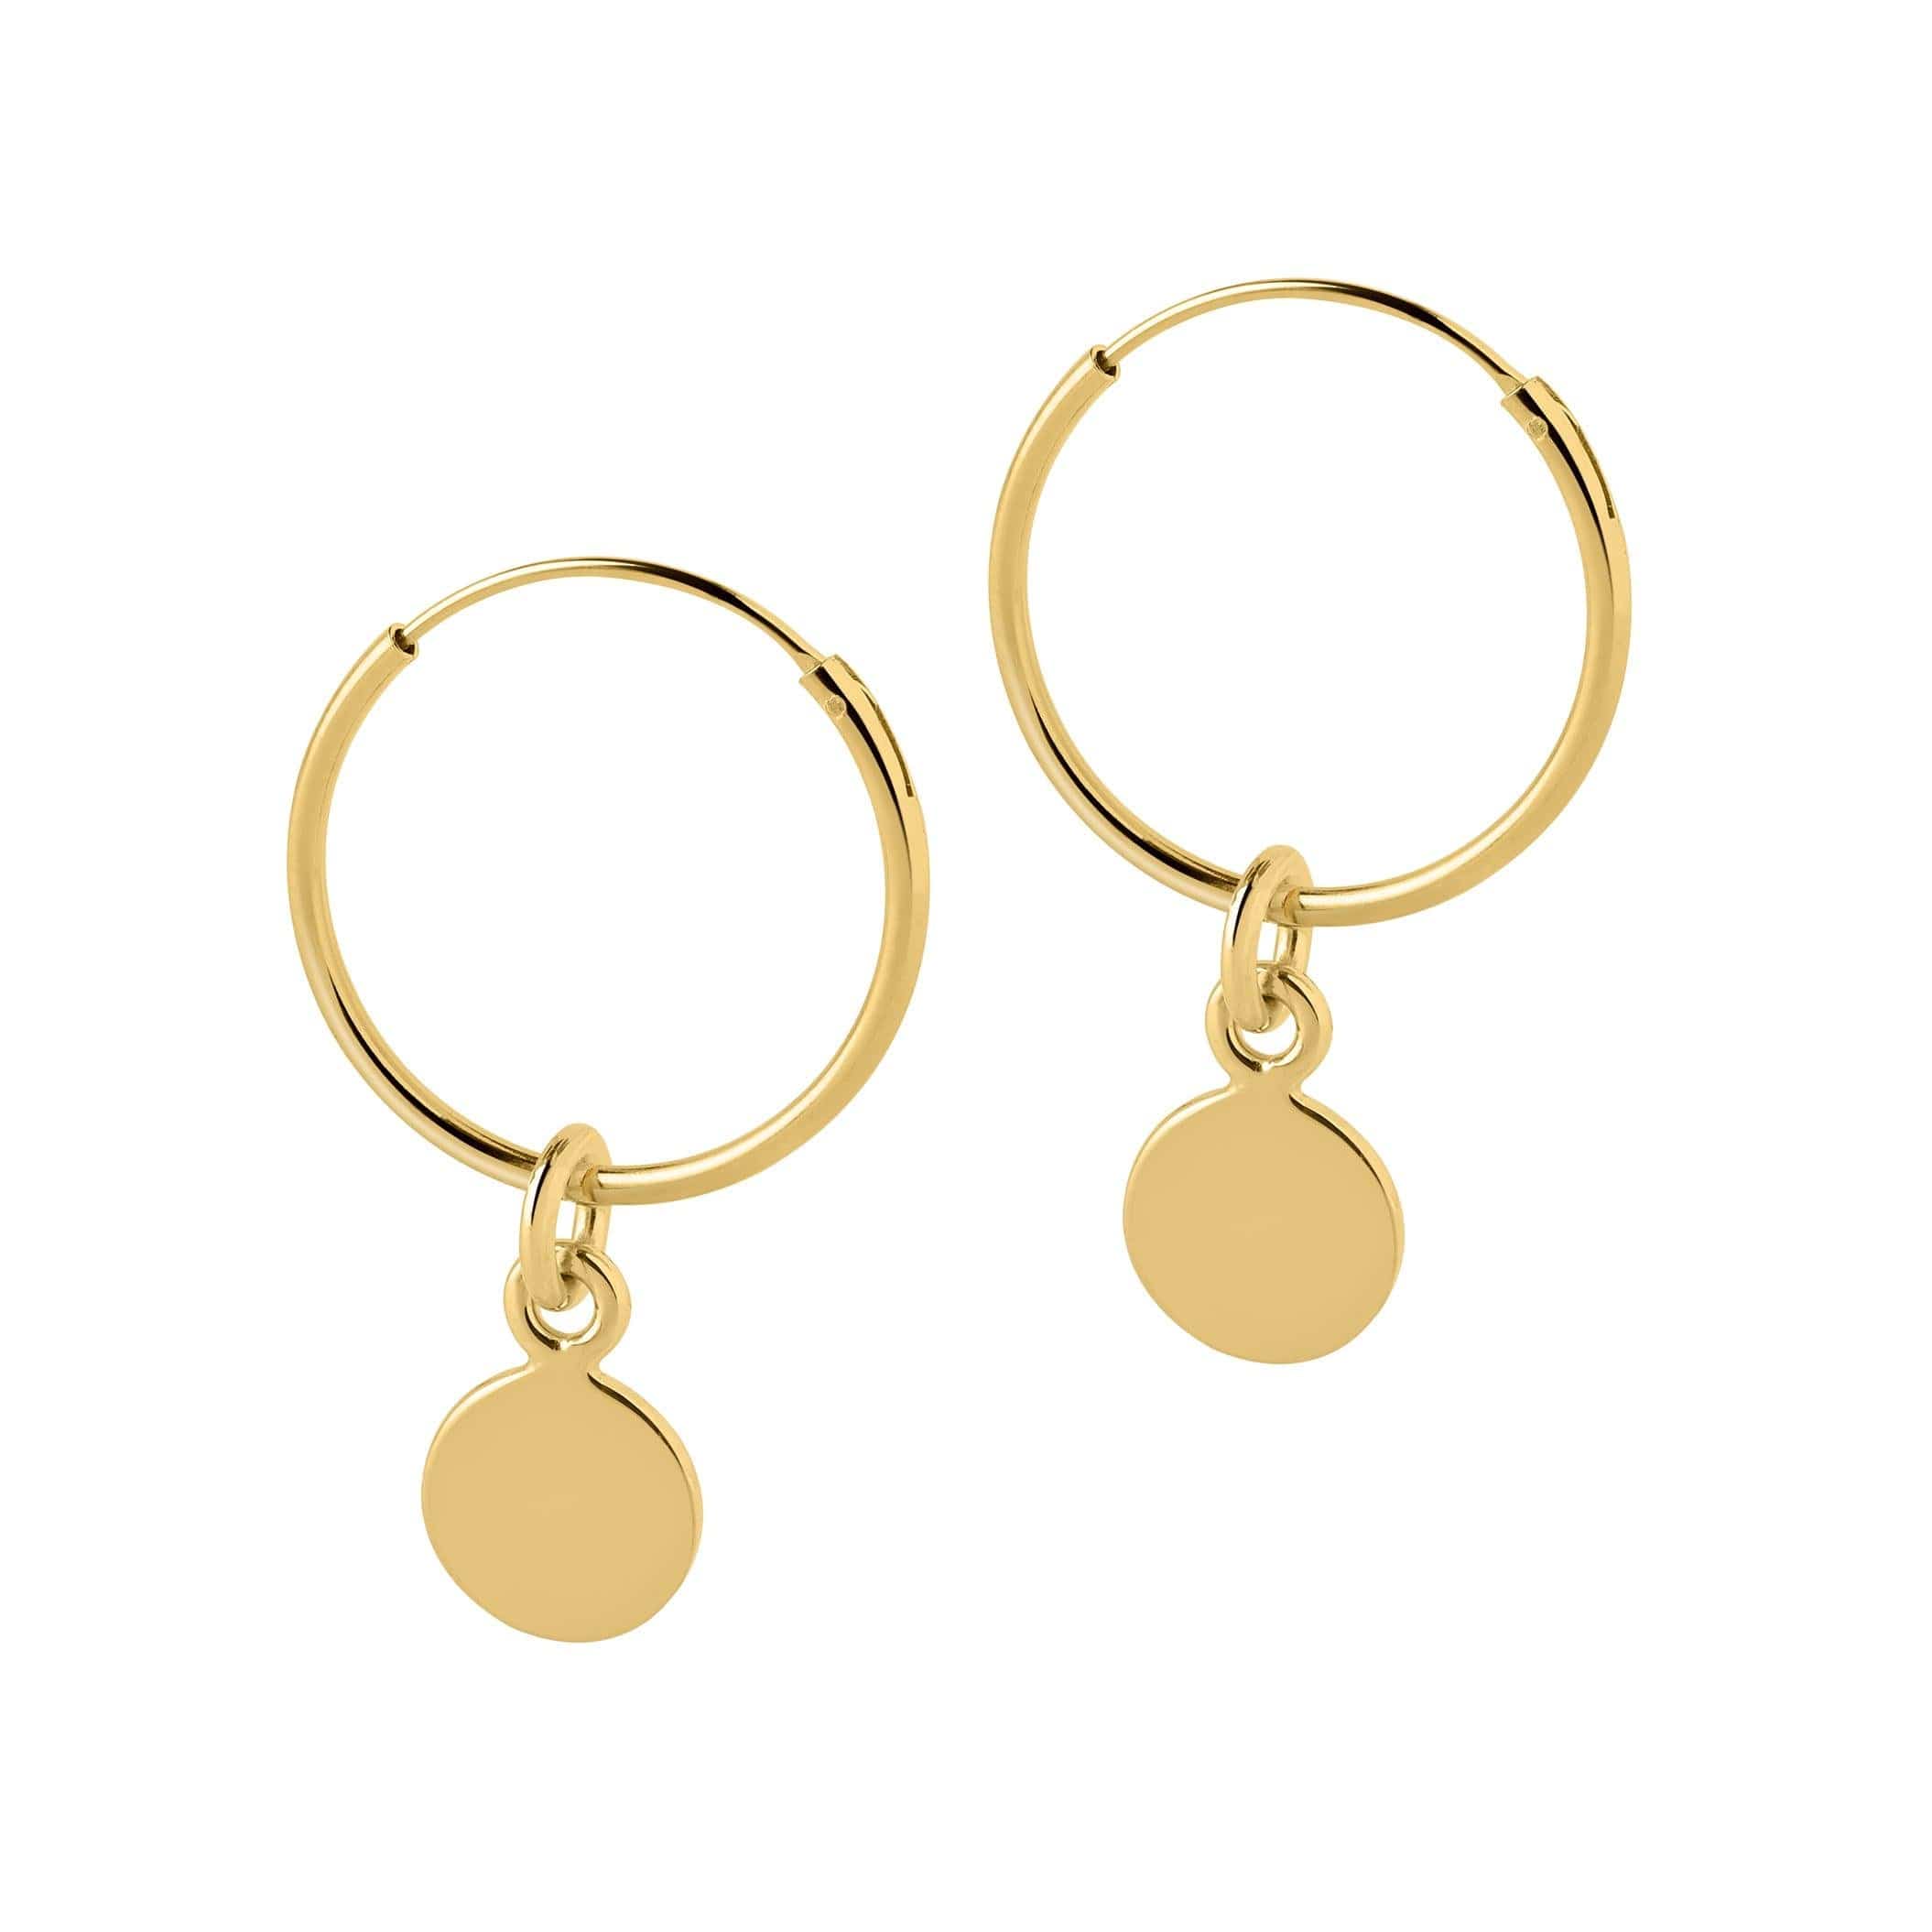 18 mm gold plated hoop earrings with round pendant